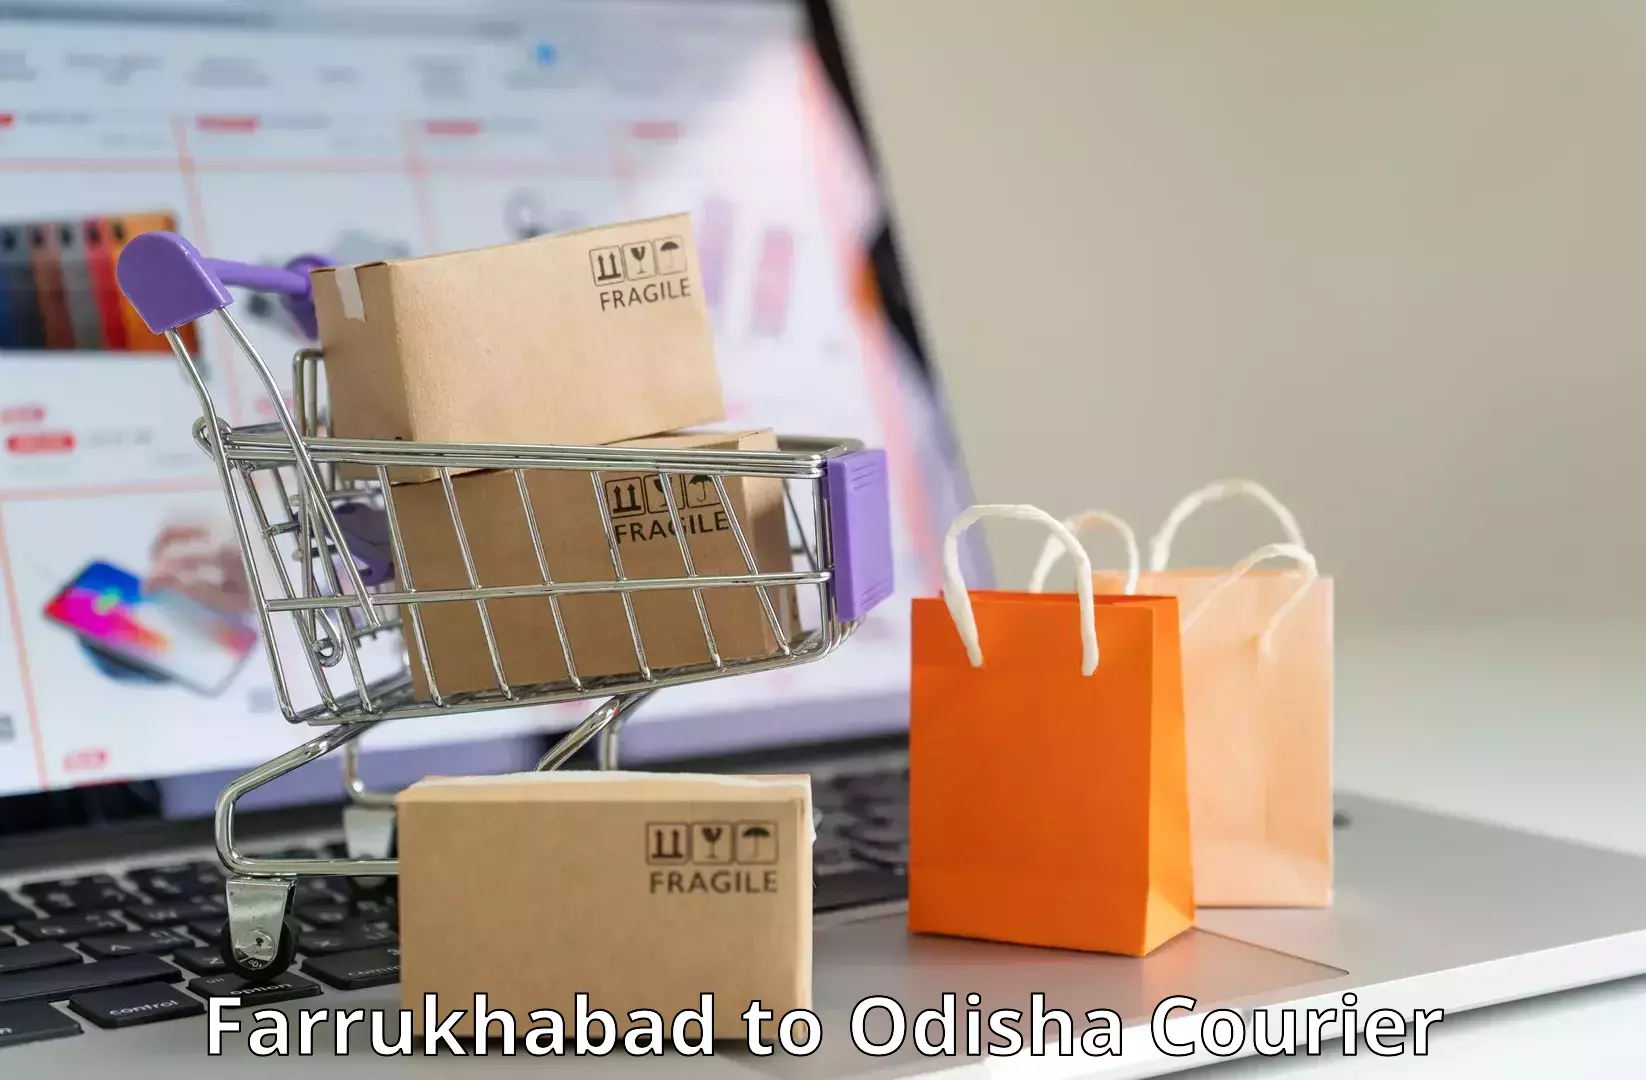 Lightweight parcel options Farrukhabad to Chandipur